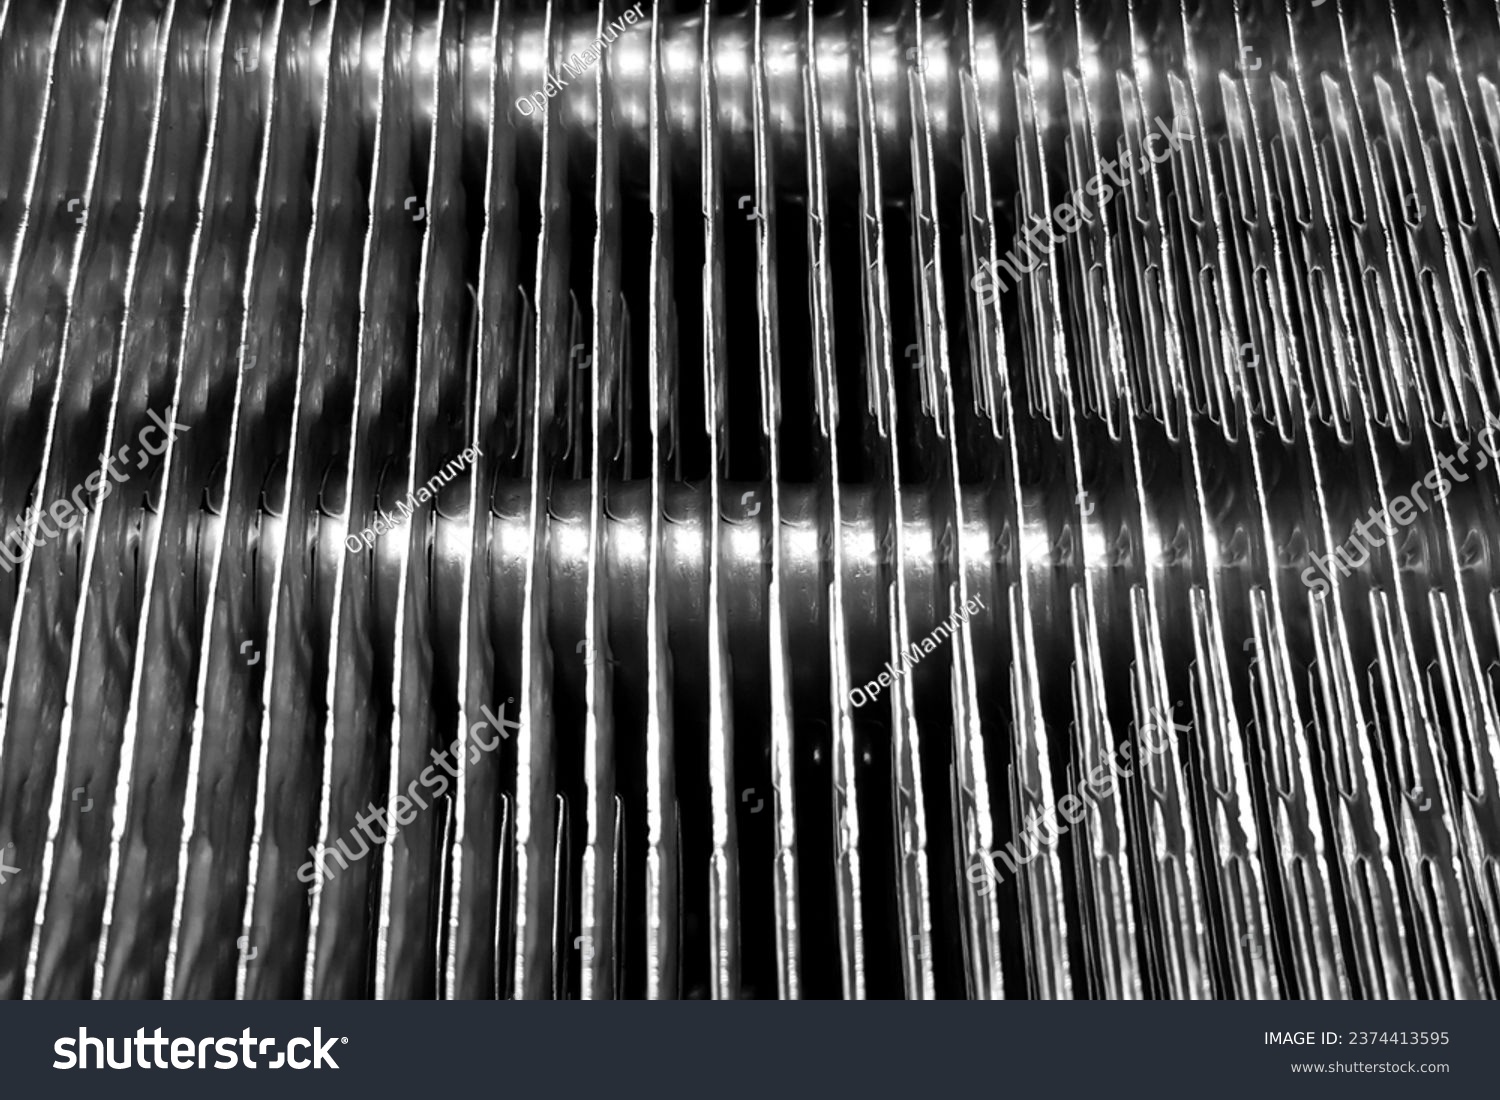 Close-up View of an AC Evaporator Coil with a Grid Radiator Pattern #2374413595